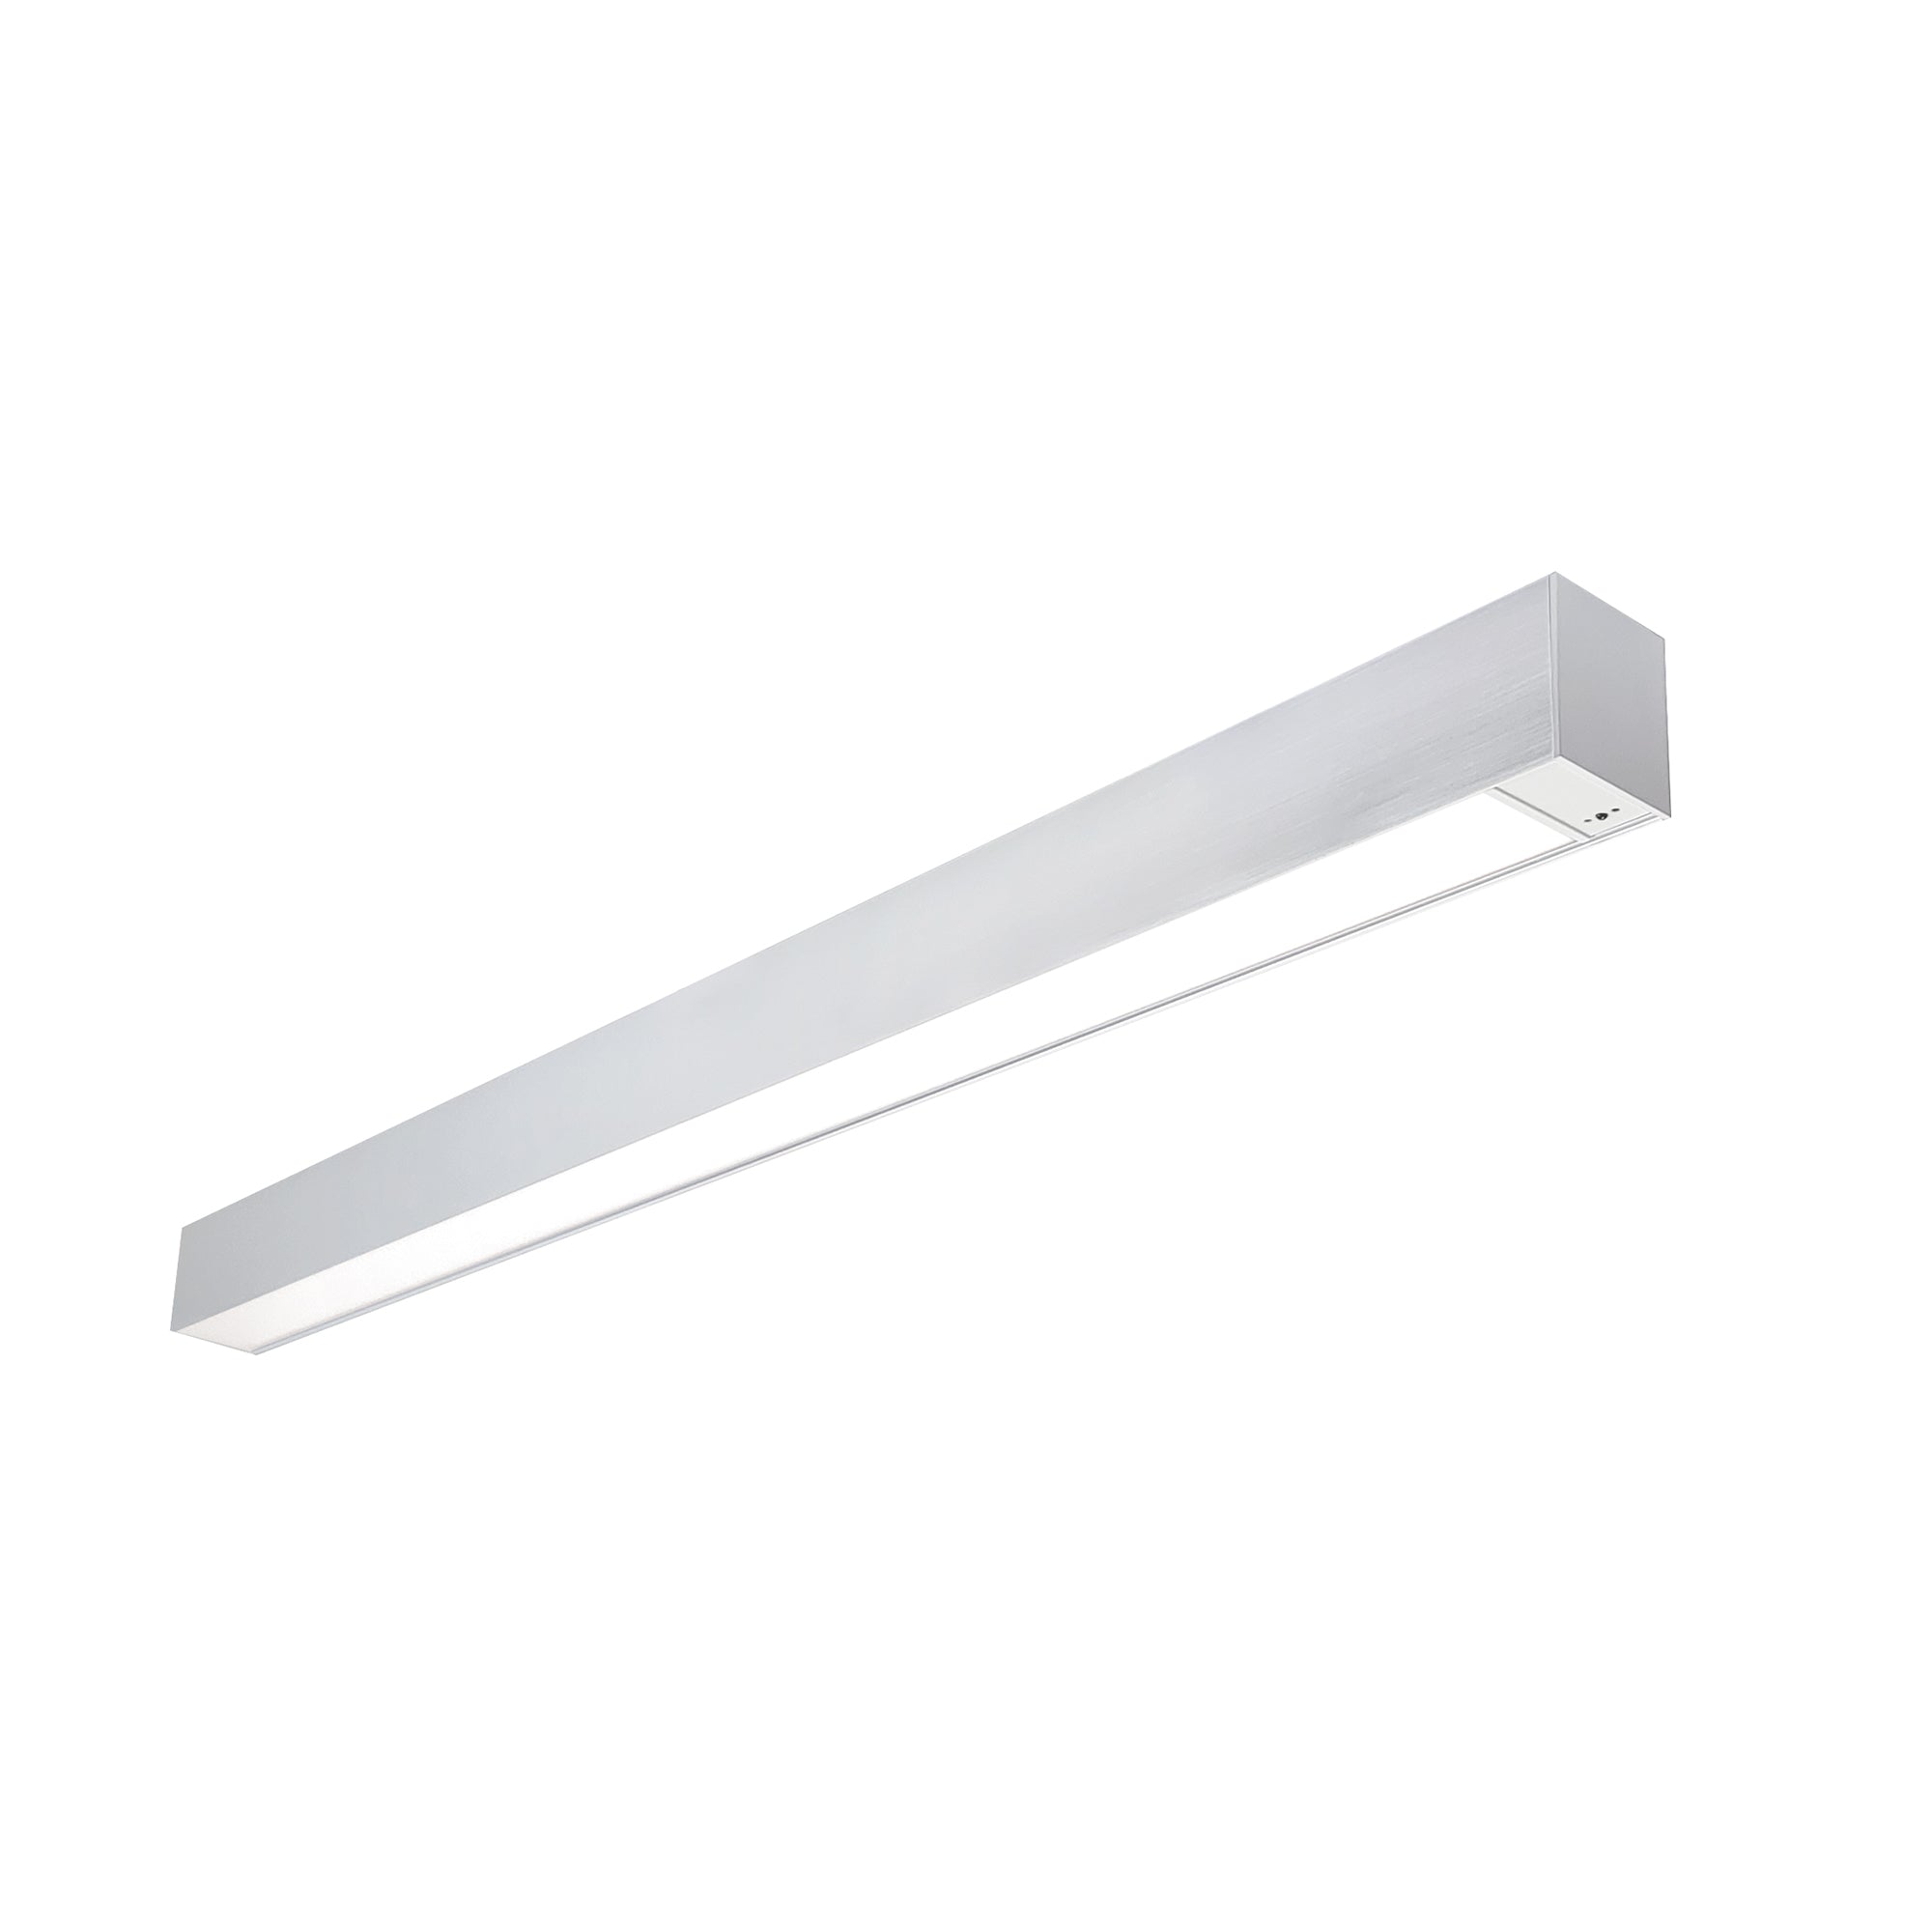 Nora Lighting NLUD-4334A/EMOS - Linear - 4' L-Line LED Indirect/Direct Linear, 6152lm / Selectable CCT, Aluminum Finish, with EM & Motion Sensor